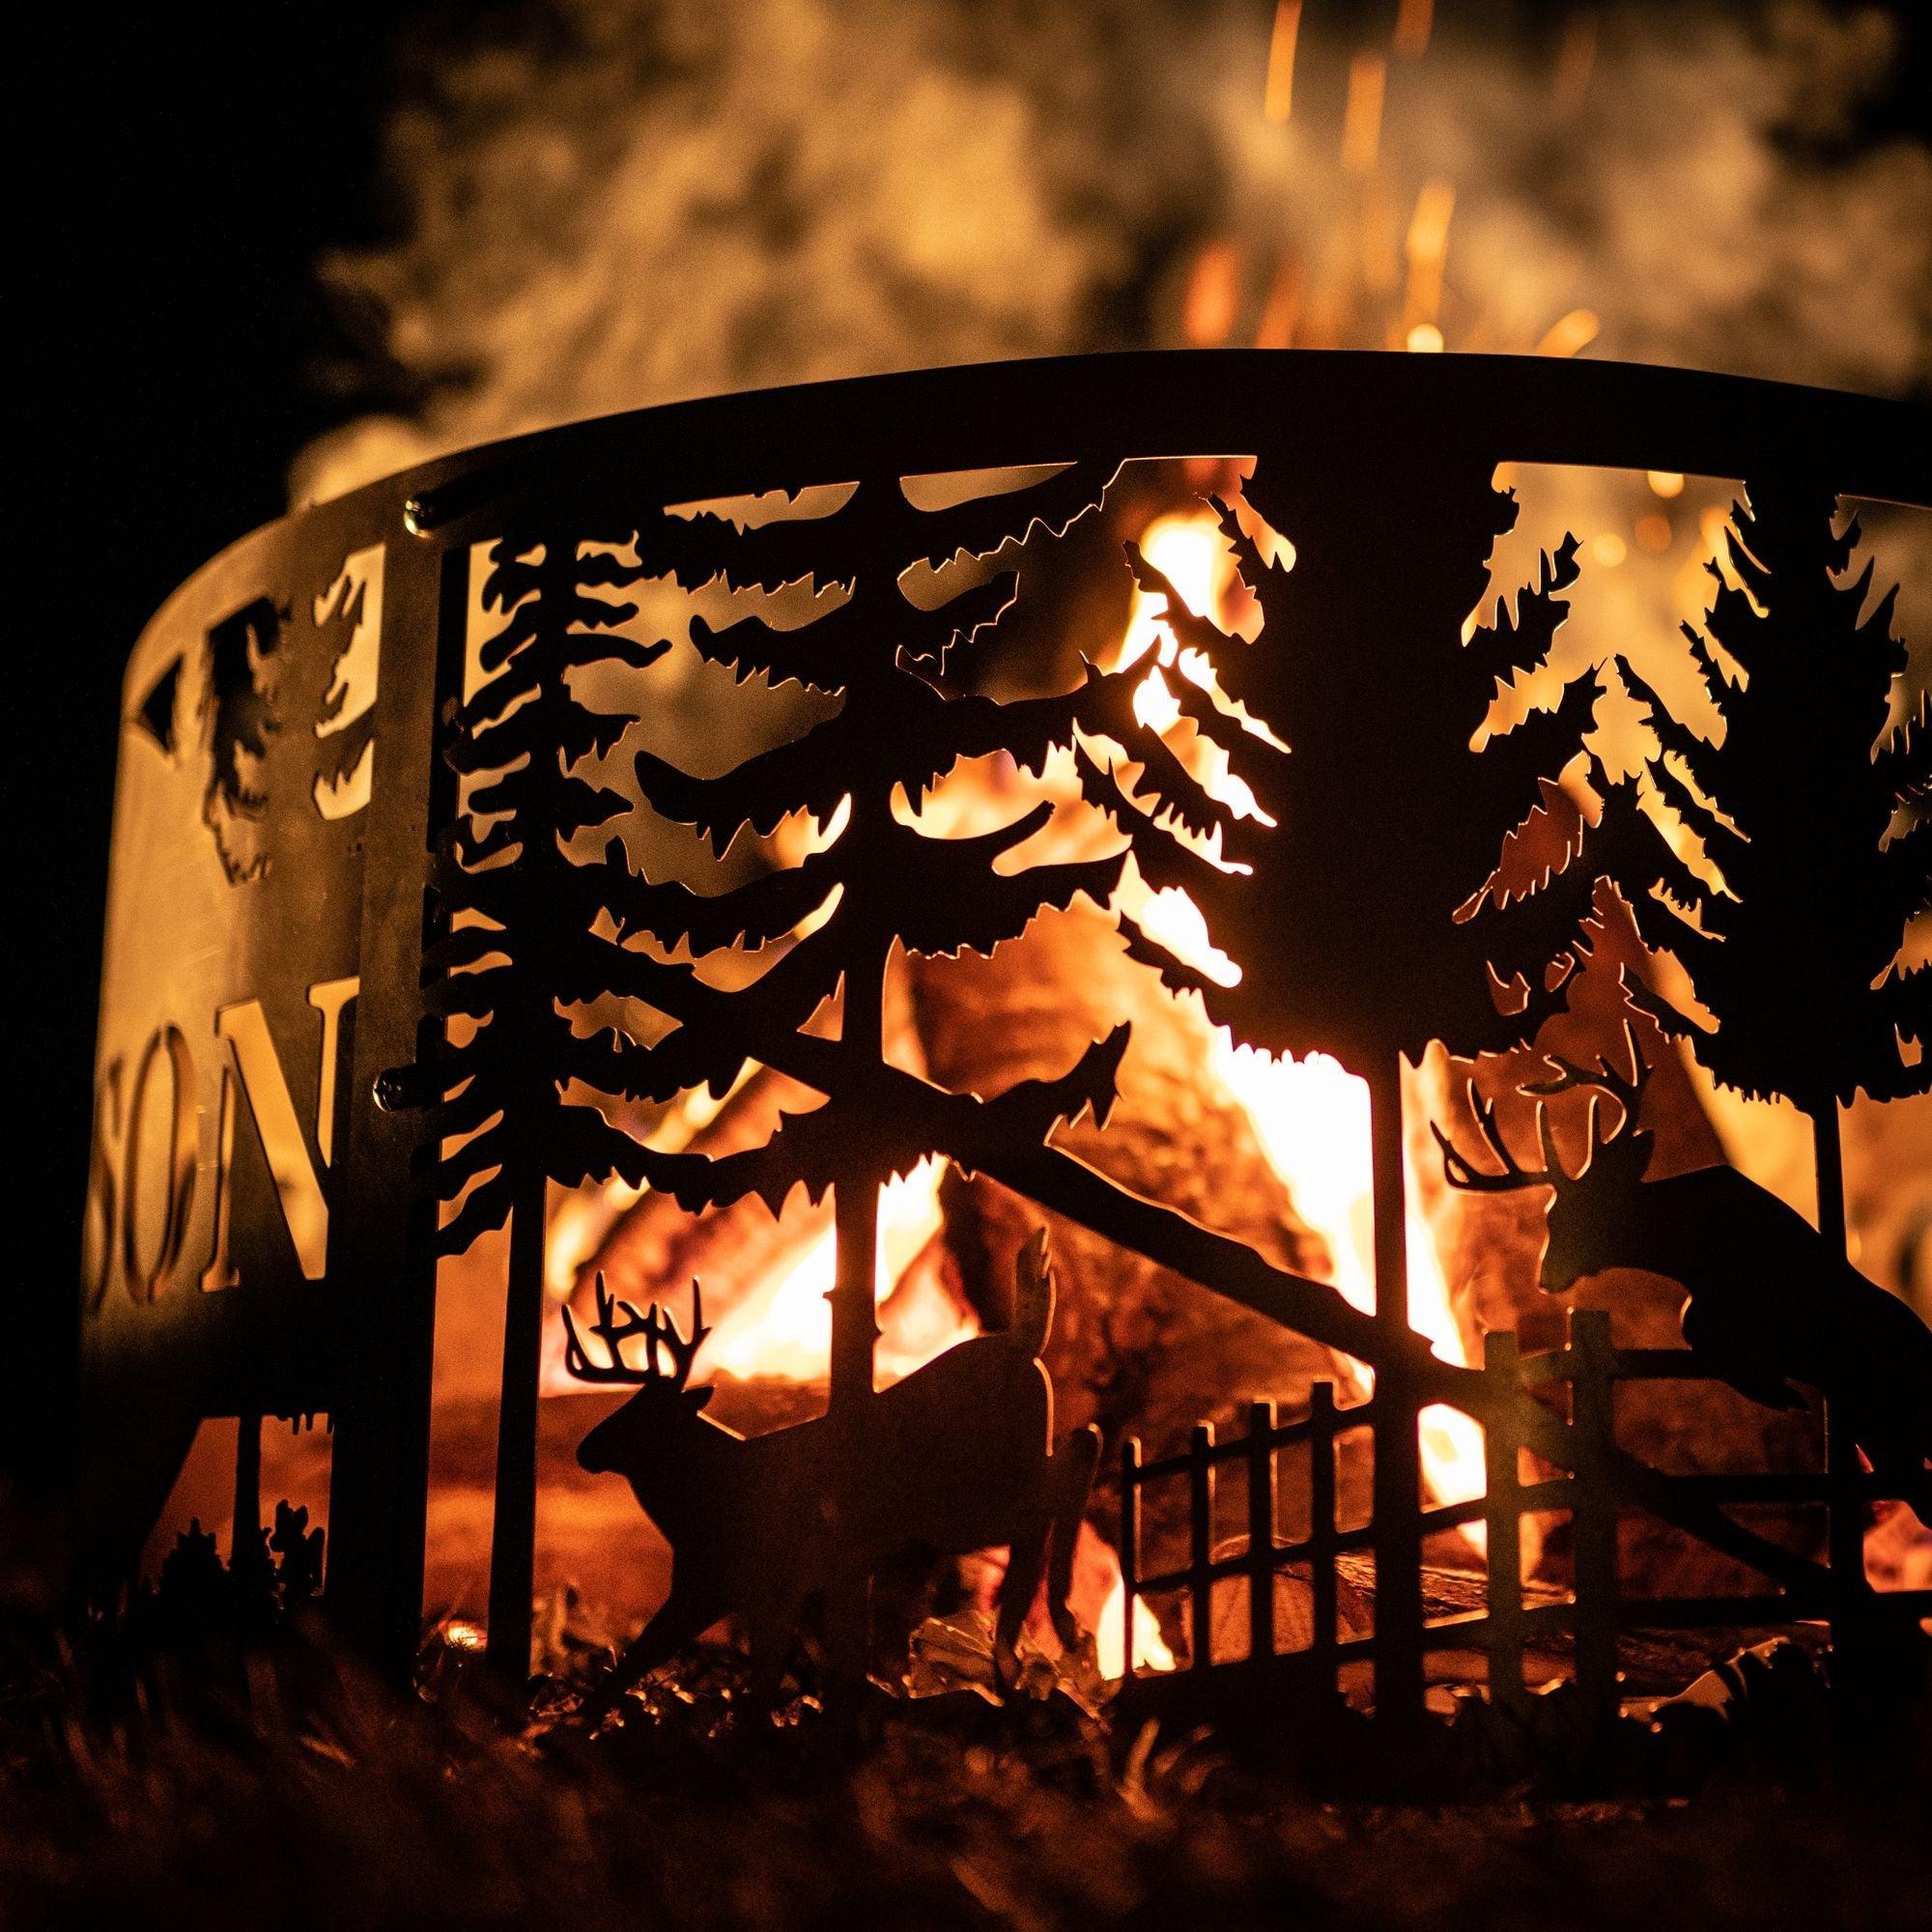 Personalized Deer Scene Fire Pit Ring - Cool Metal Signs